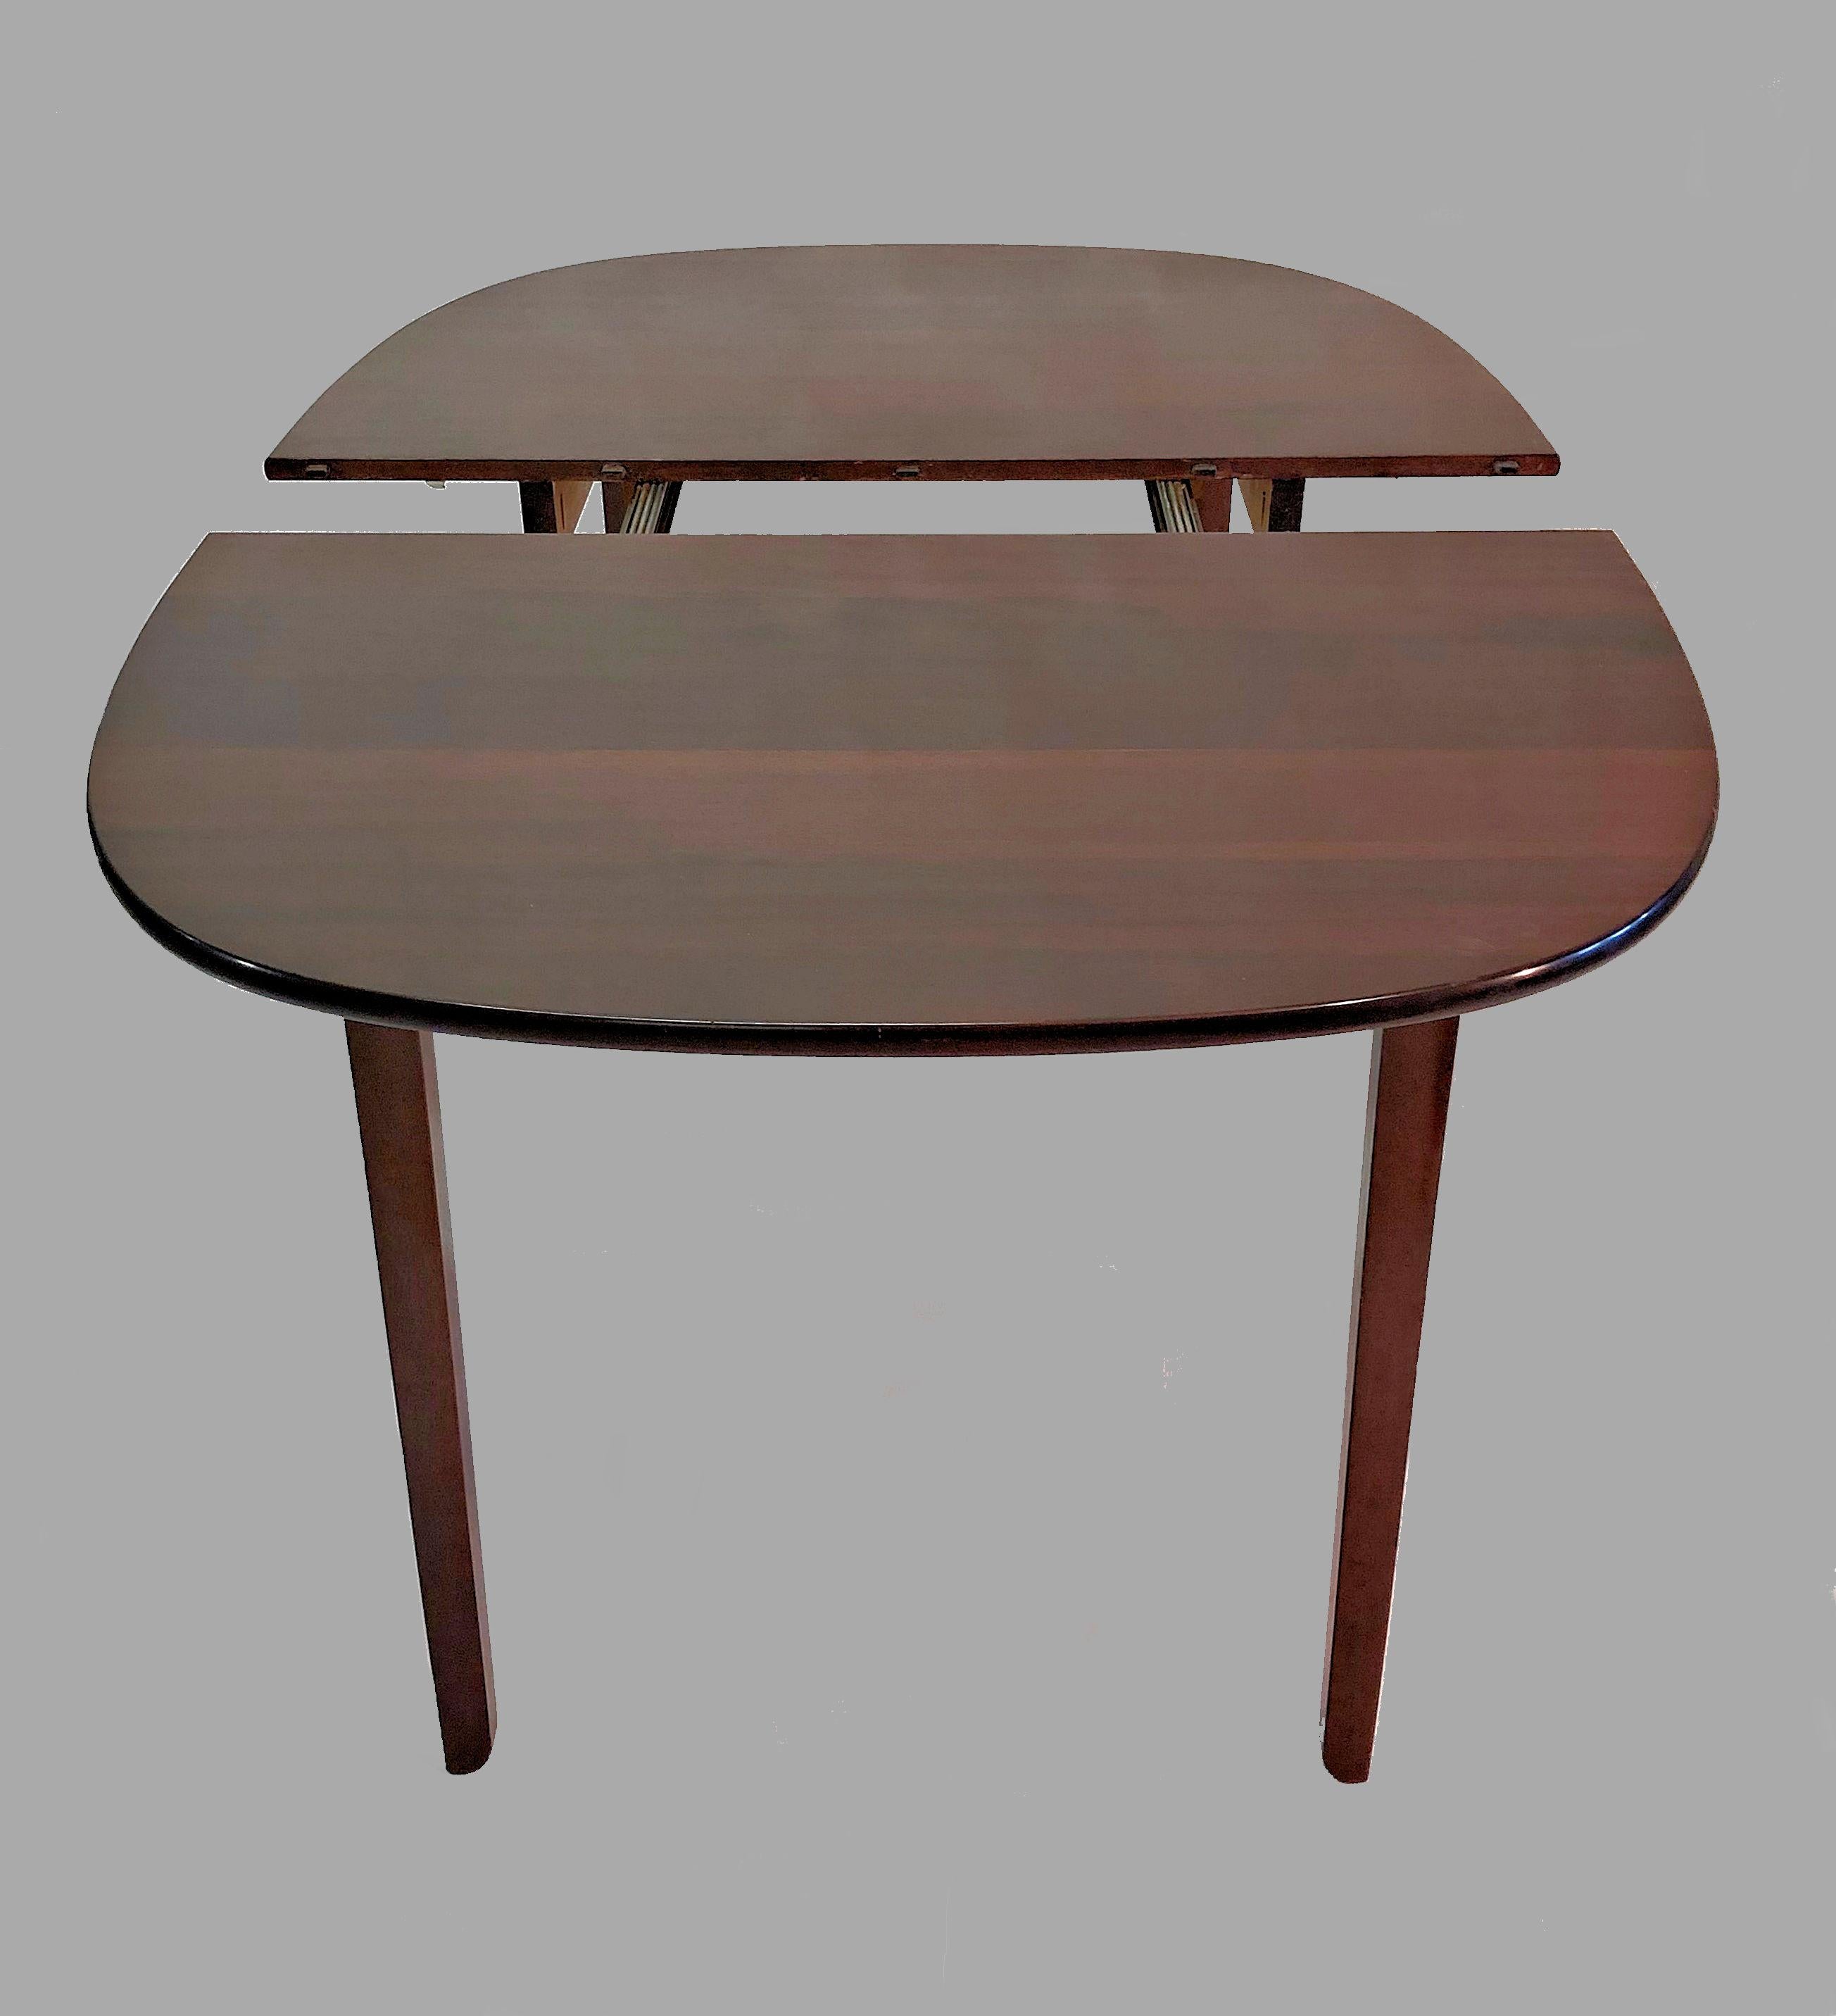 Danish 1960s Ole Wanscher Refinished Expandable Mahogany Dining Table by P. Jeppesen For Sale